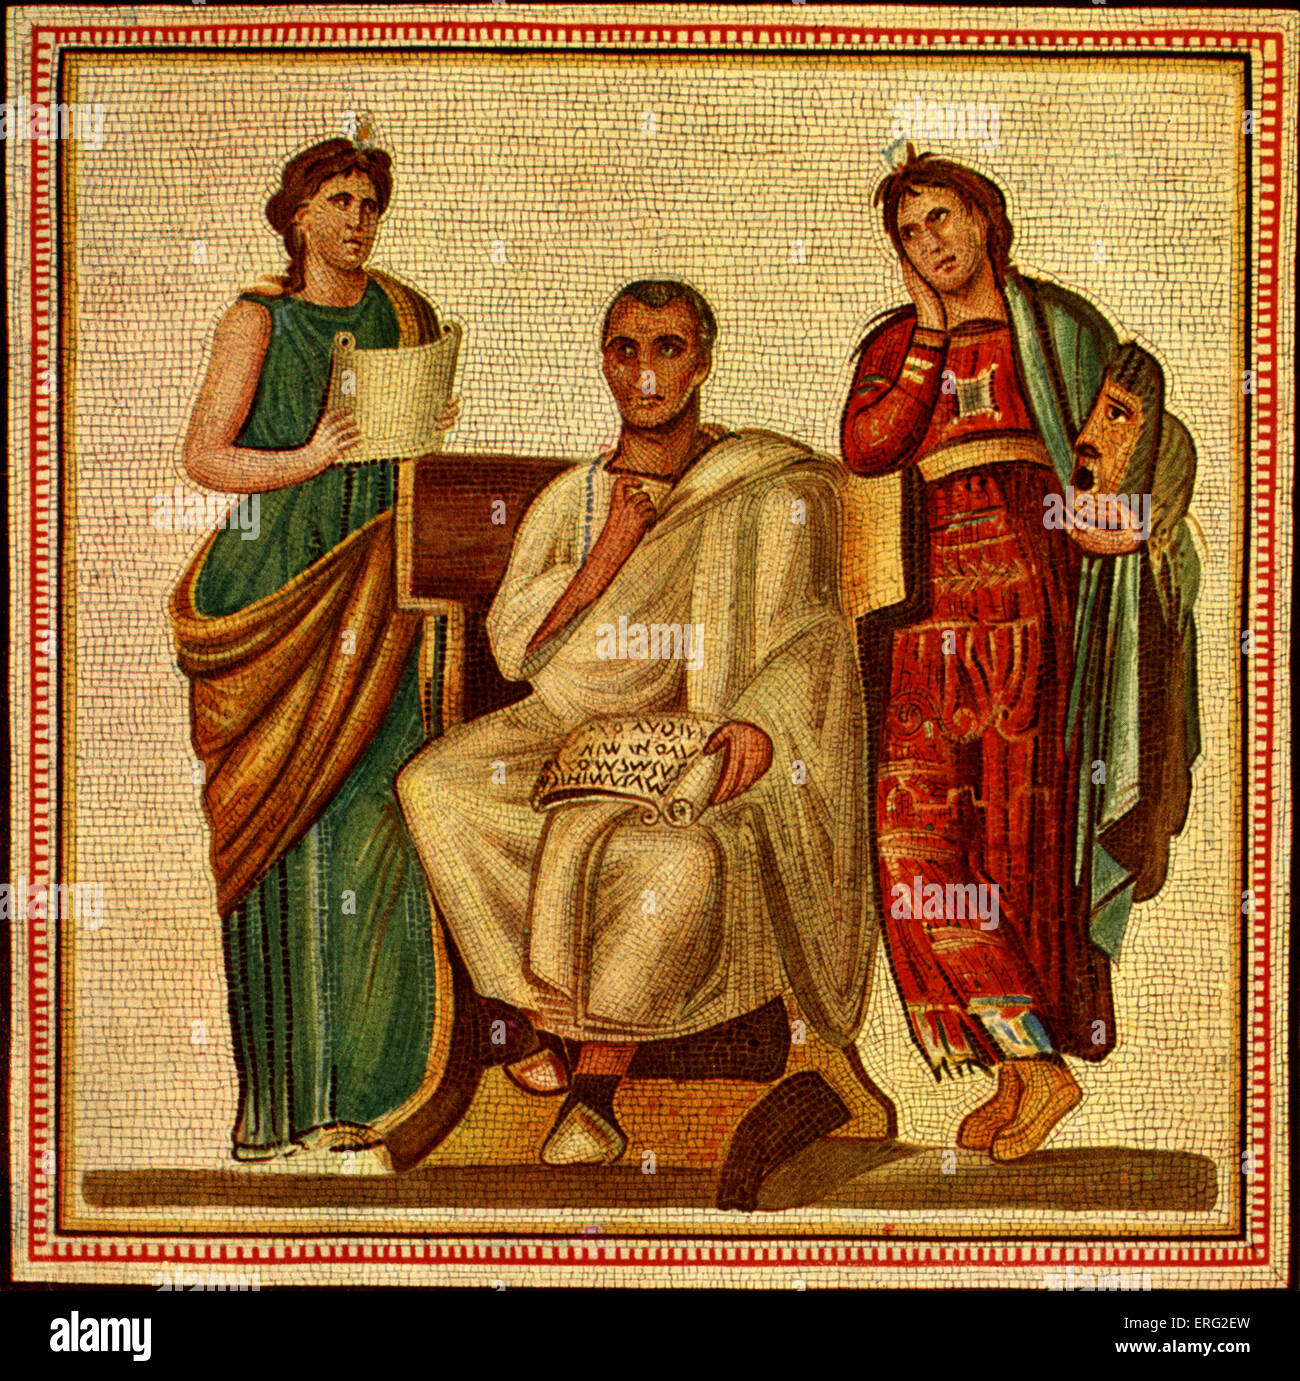 Virgil with Clio and Melpomene, the muses of History and Tragedy. Roman mosaic found in Hadrumetum, Tunisia. Publius Virgilius Maro classical Roman poet 15 October 70 BCE - 21 September 19 BCE. Stock Photo